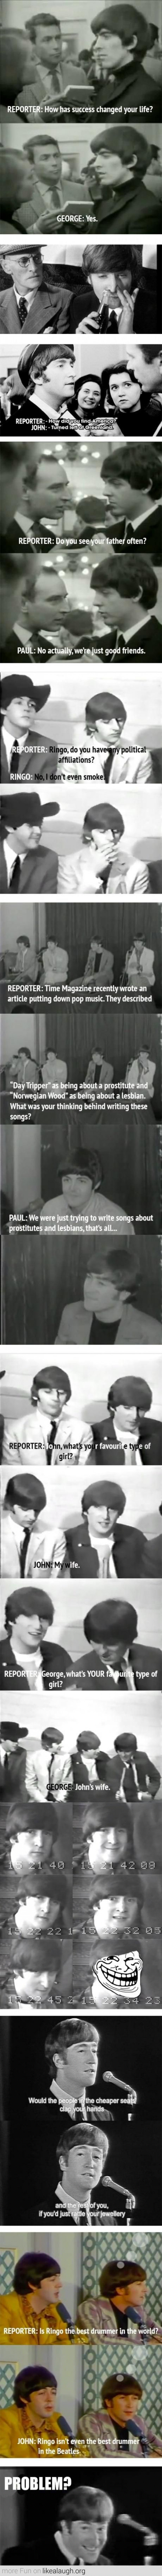 The Beatles Trolling Before It Was Cool